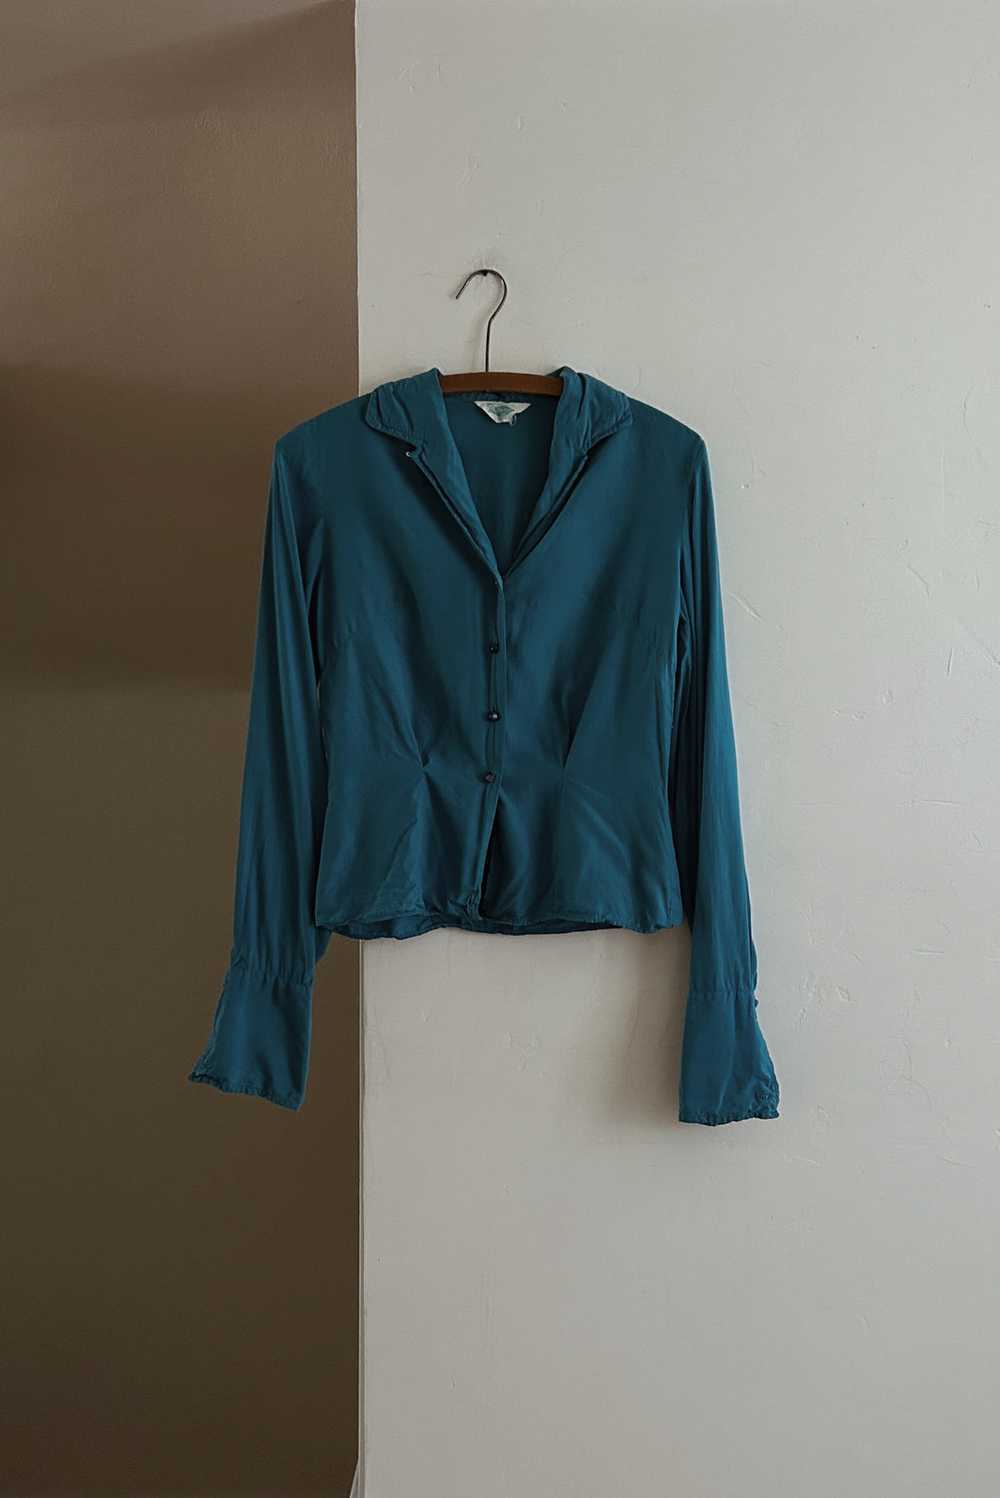 1950's TEAL SILK BUTTON BLOUSE - image 1